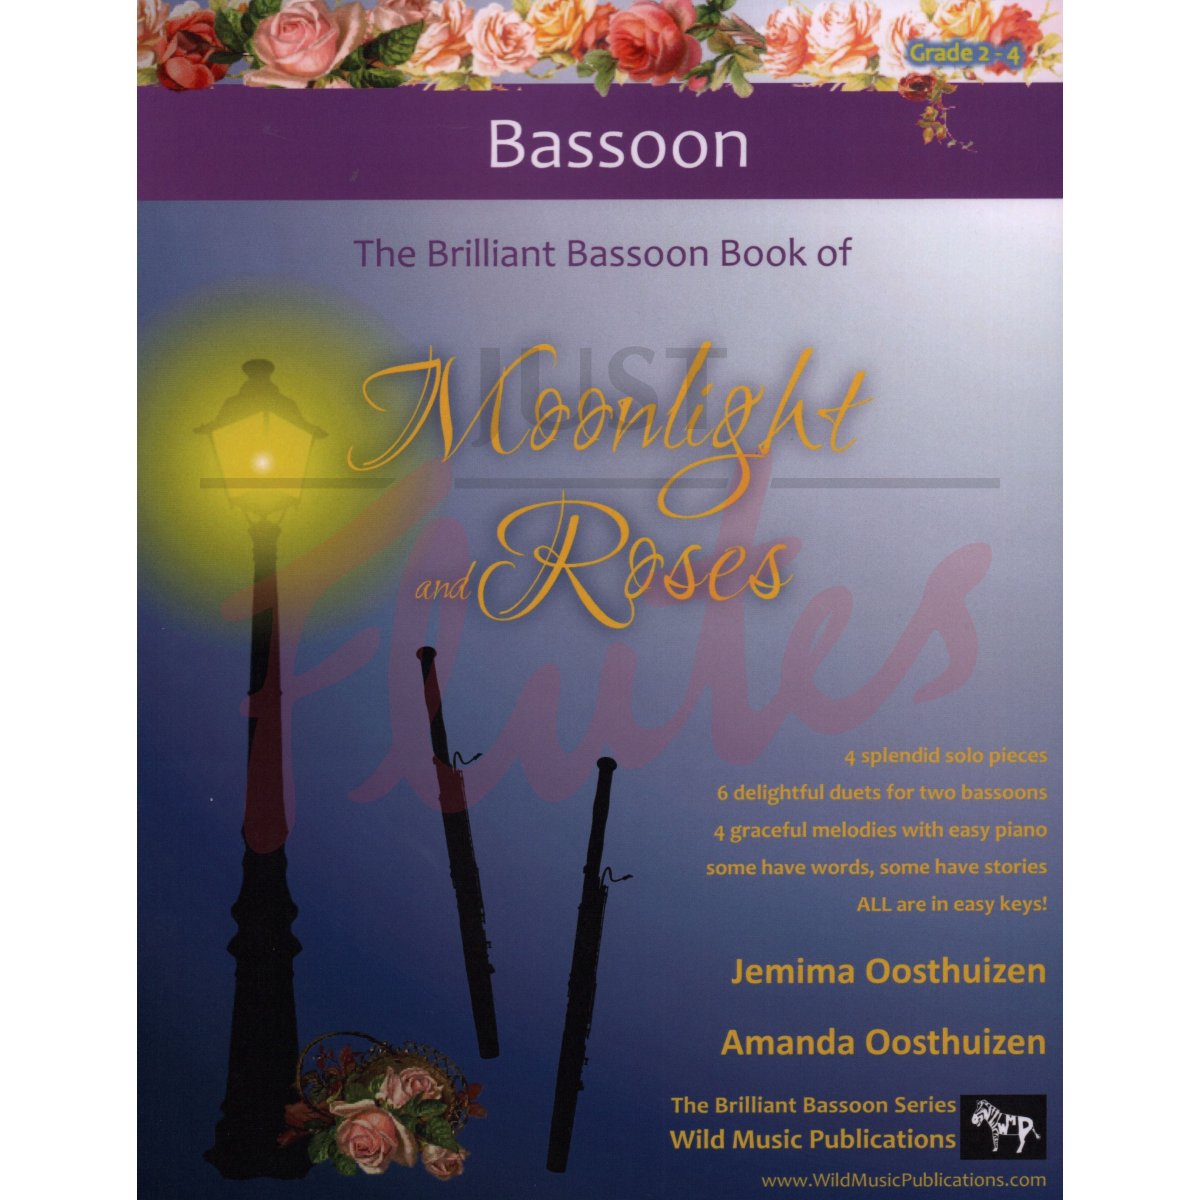 The Brilliant Bassoon Book of Moonlight and Roses